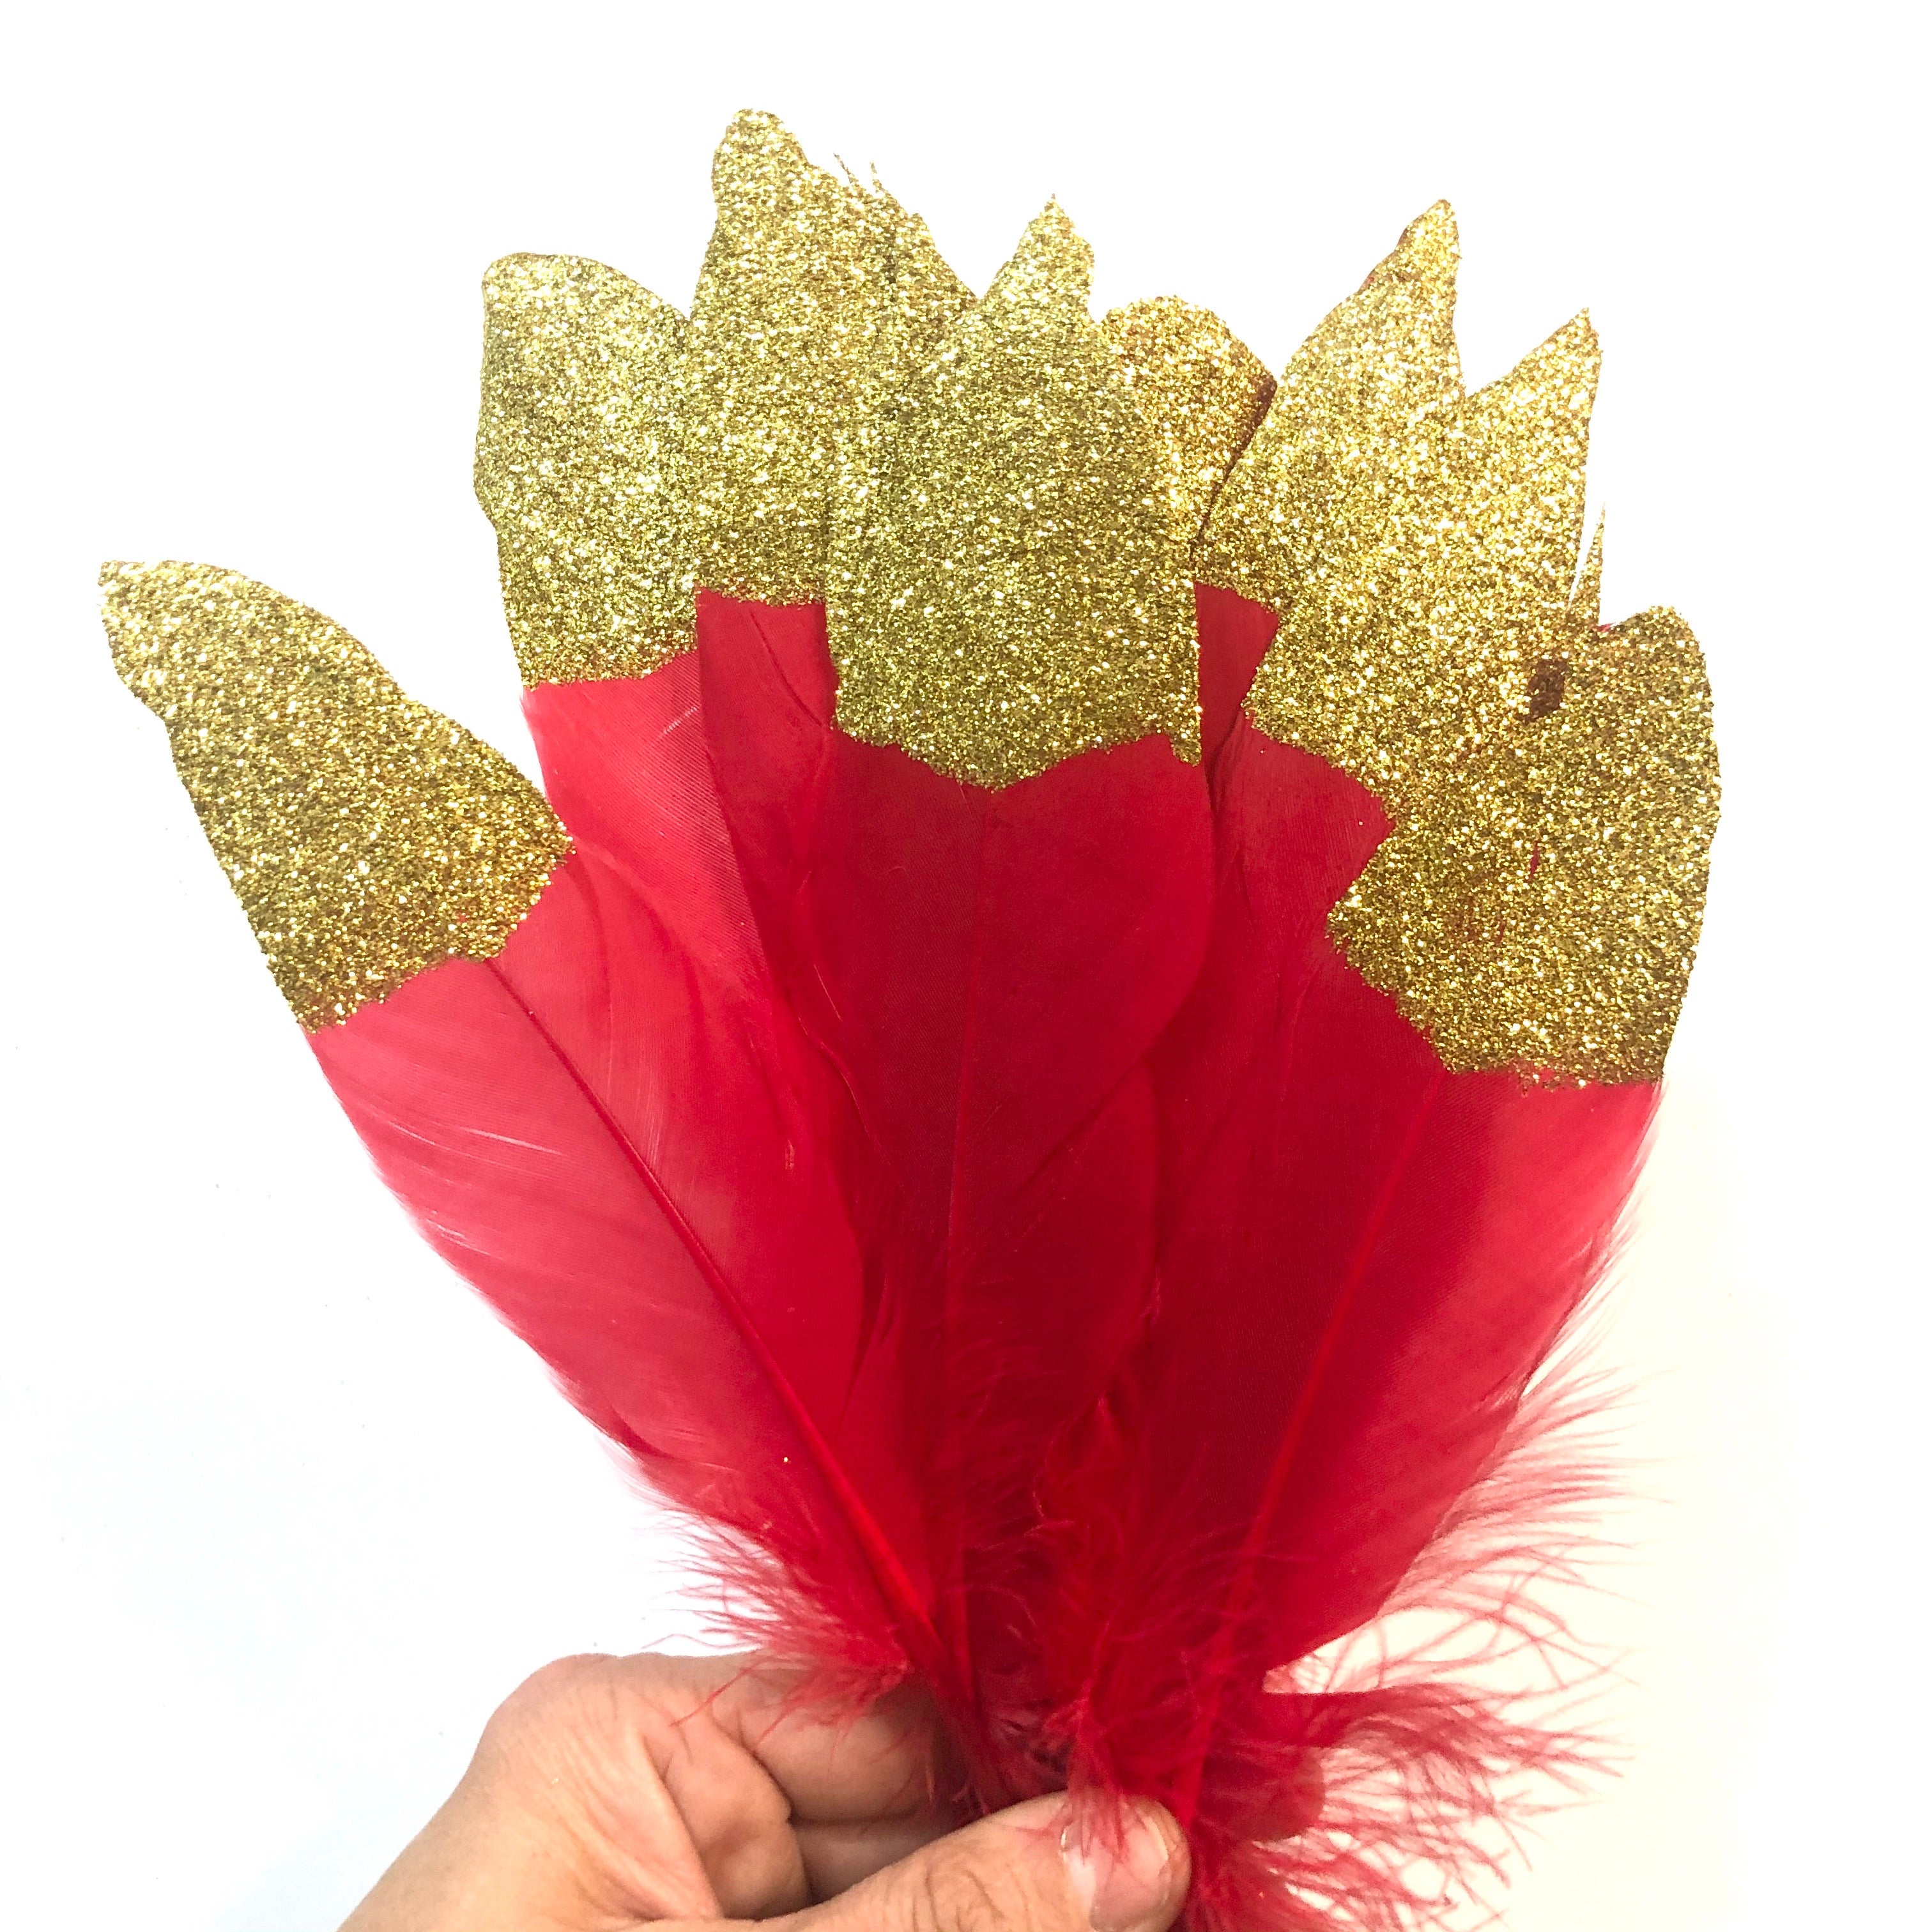 Goose Pointer Feather Gold Glitter Tipped x 10 pcs - Red